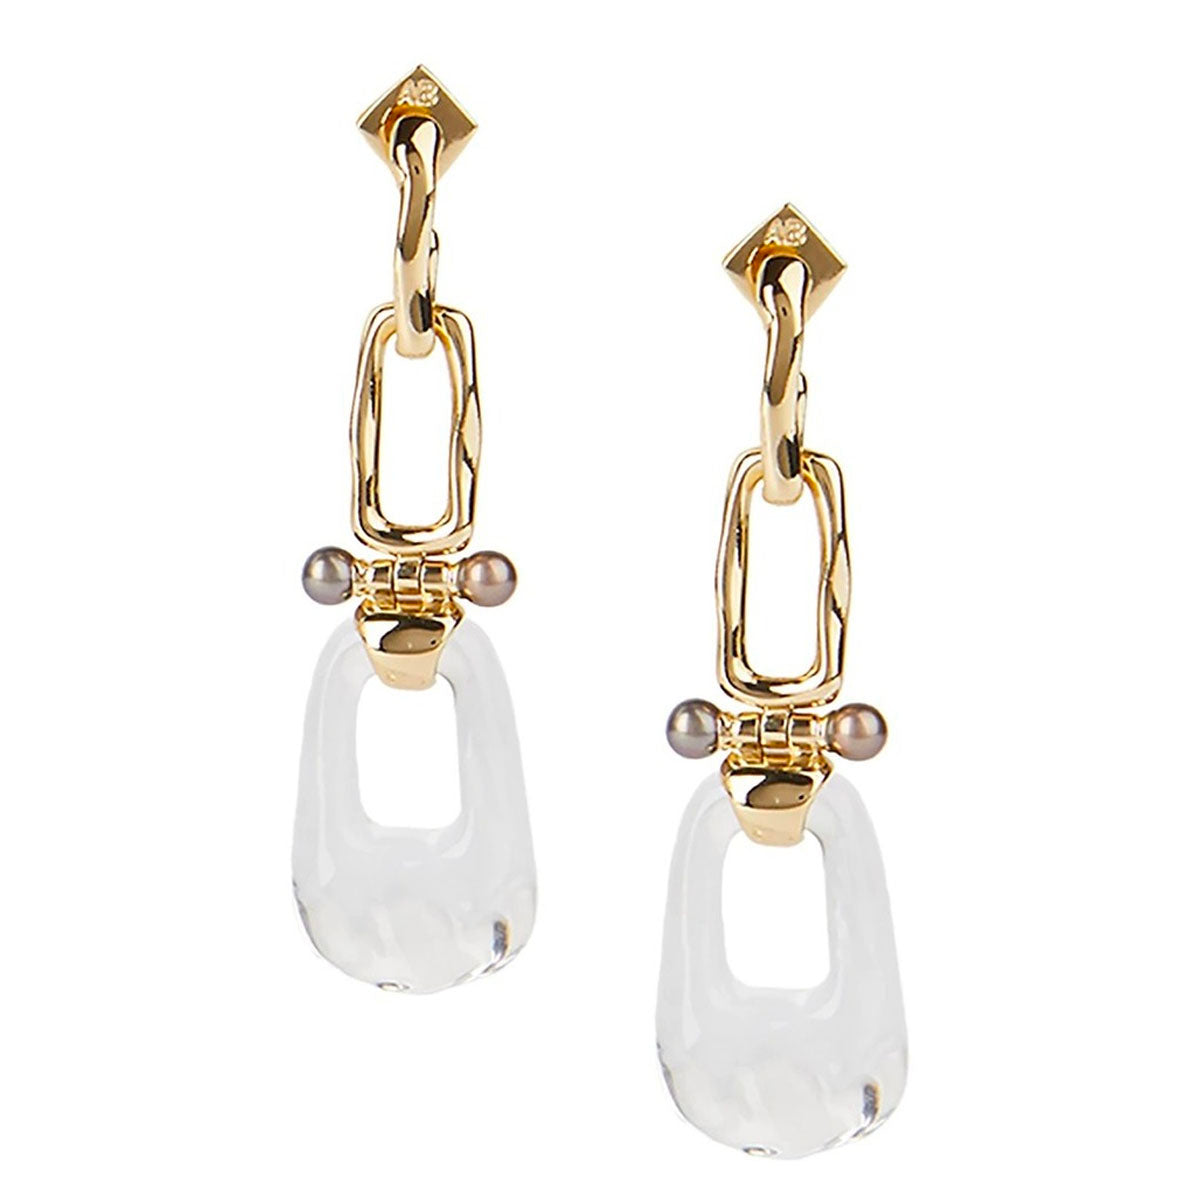 Alexis Bittar Future Antiquity 10k Yellow Gold Plated Earrings